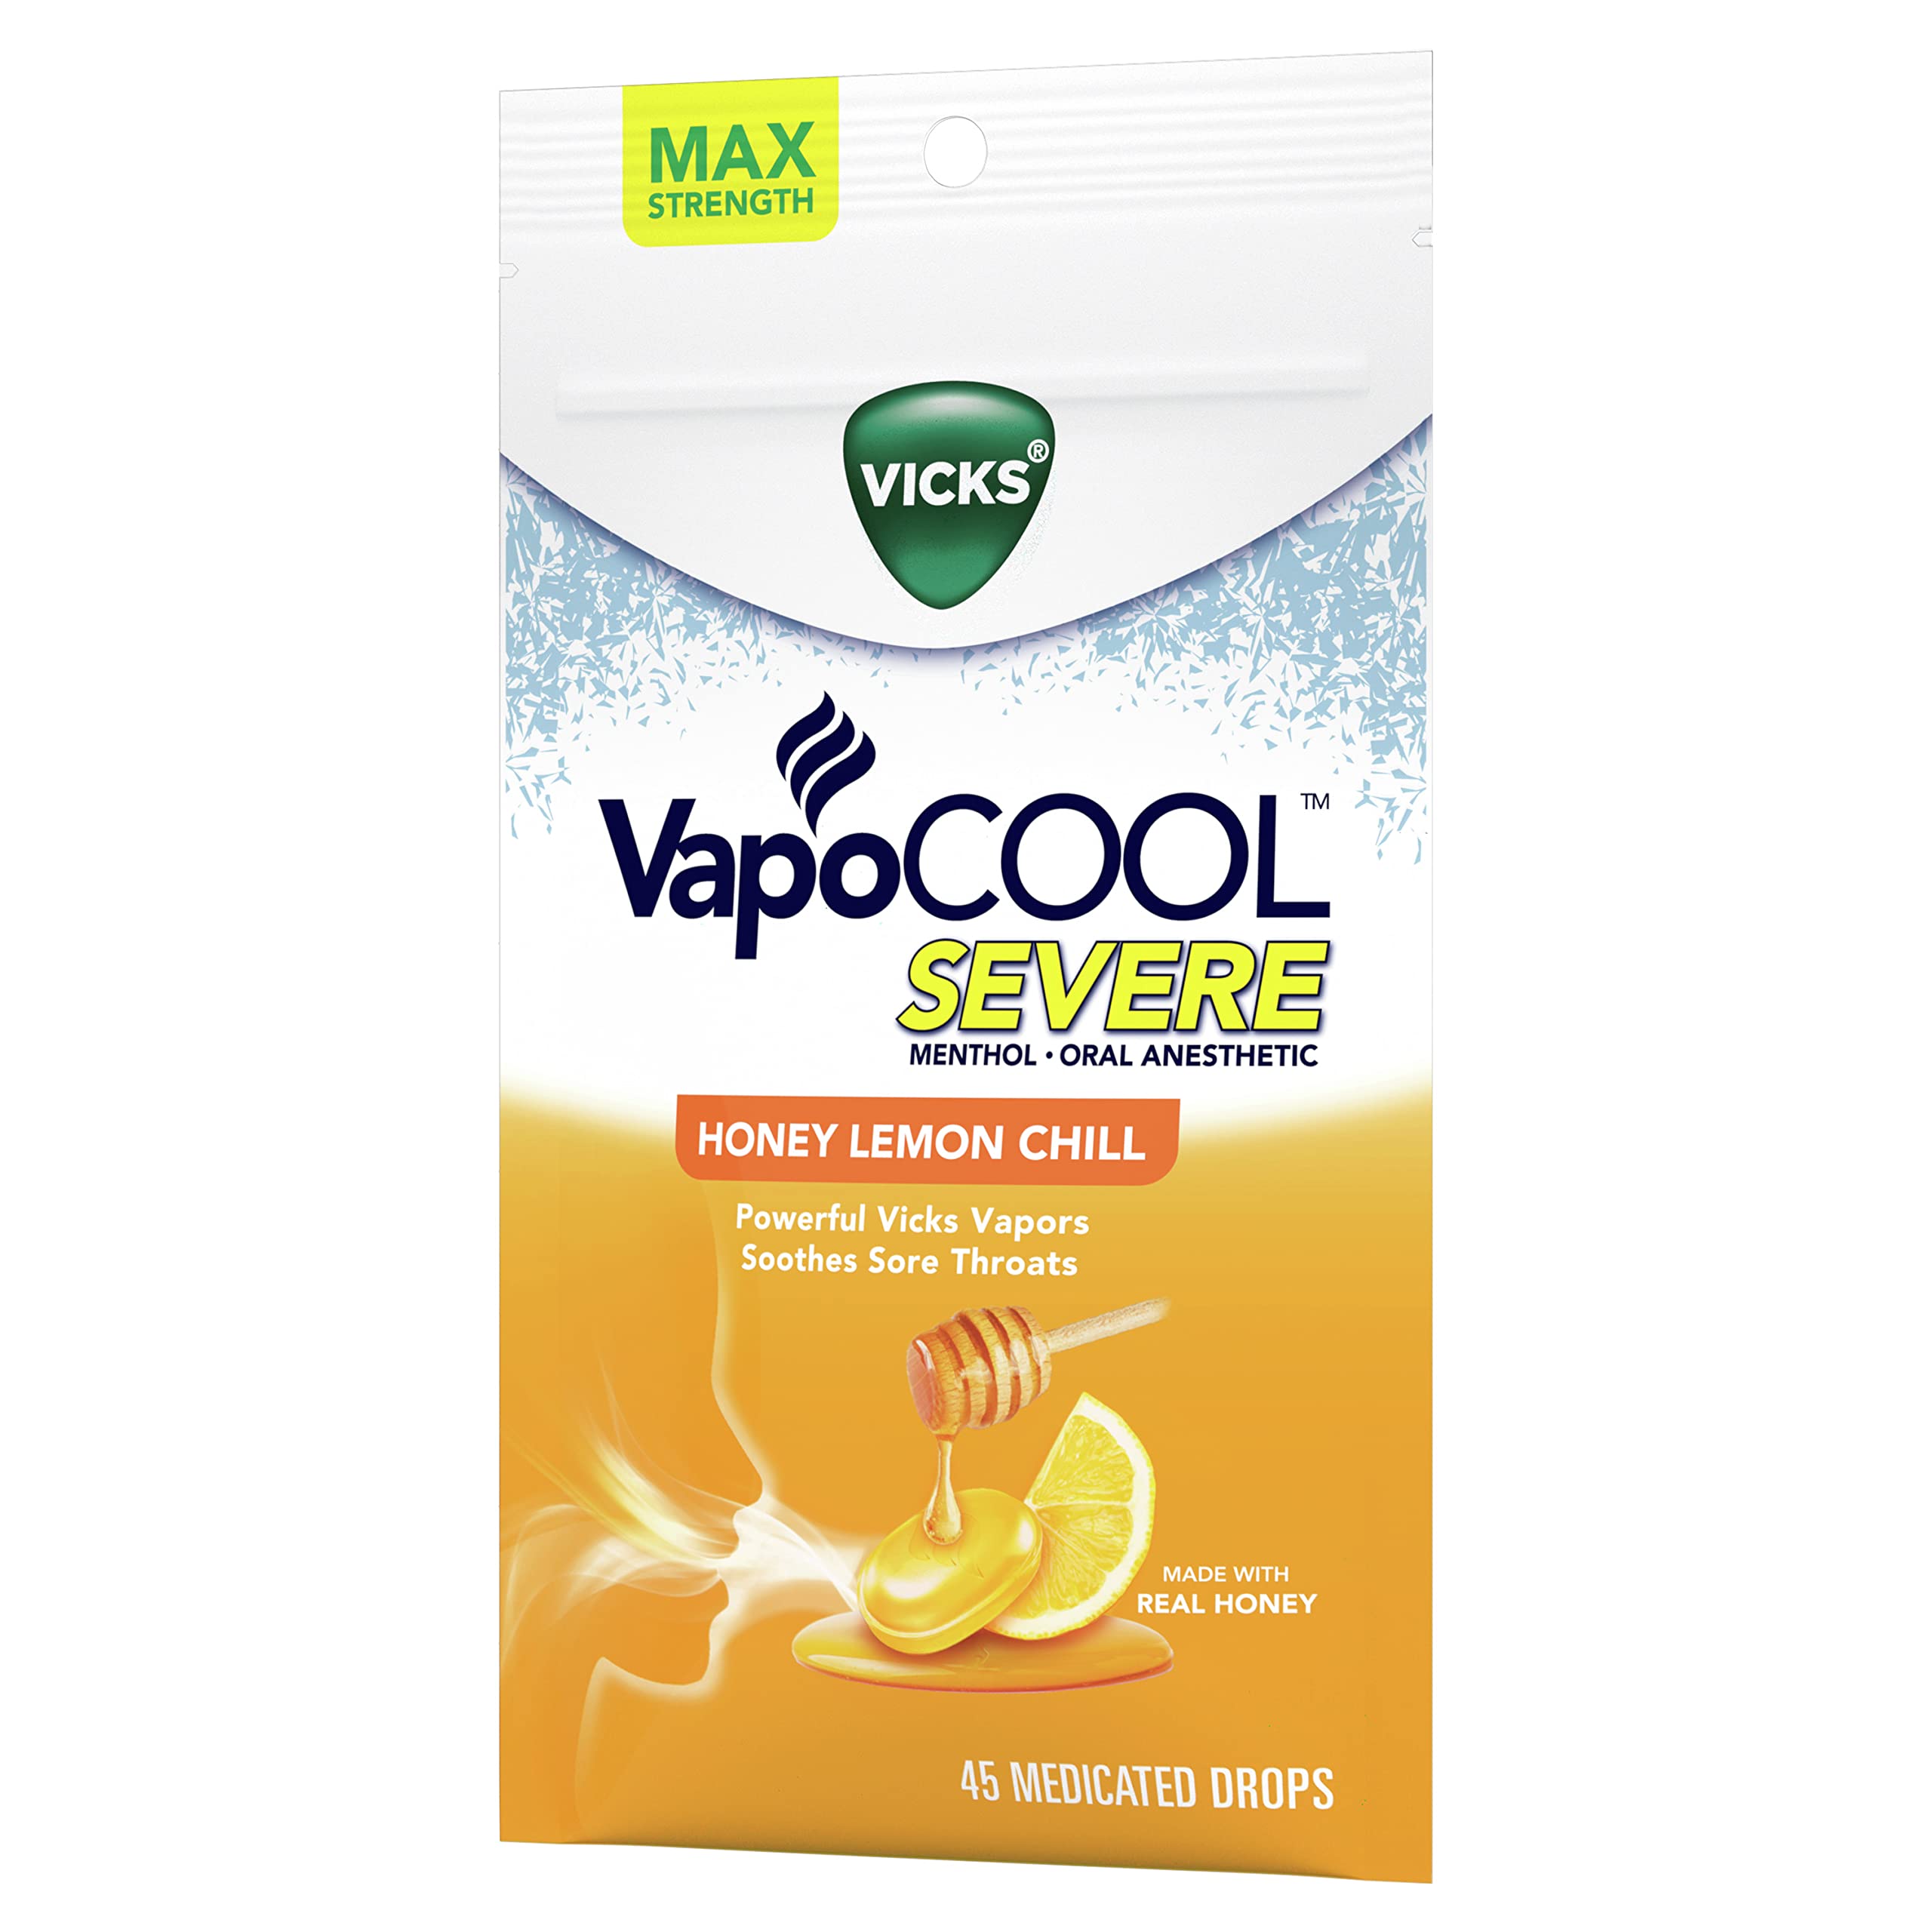 Vicks VapoCOOL Severe, Medicated Drops, Menthol Soothes Sore Throat Pain Caused by Cough, Honey Lemon Chill Flavor, 225 Drops (5 Packs of 45)